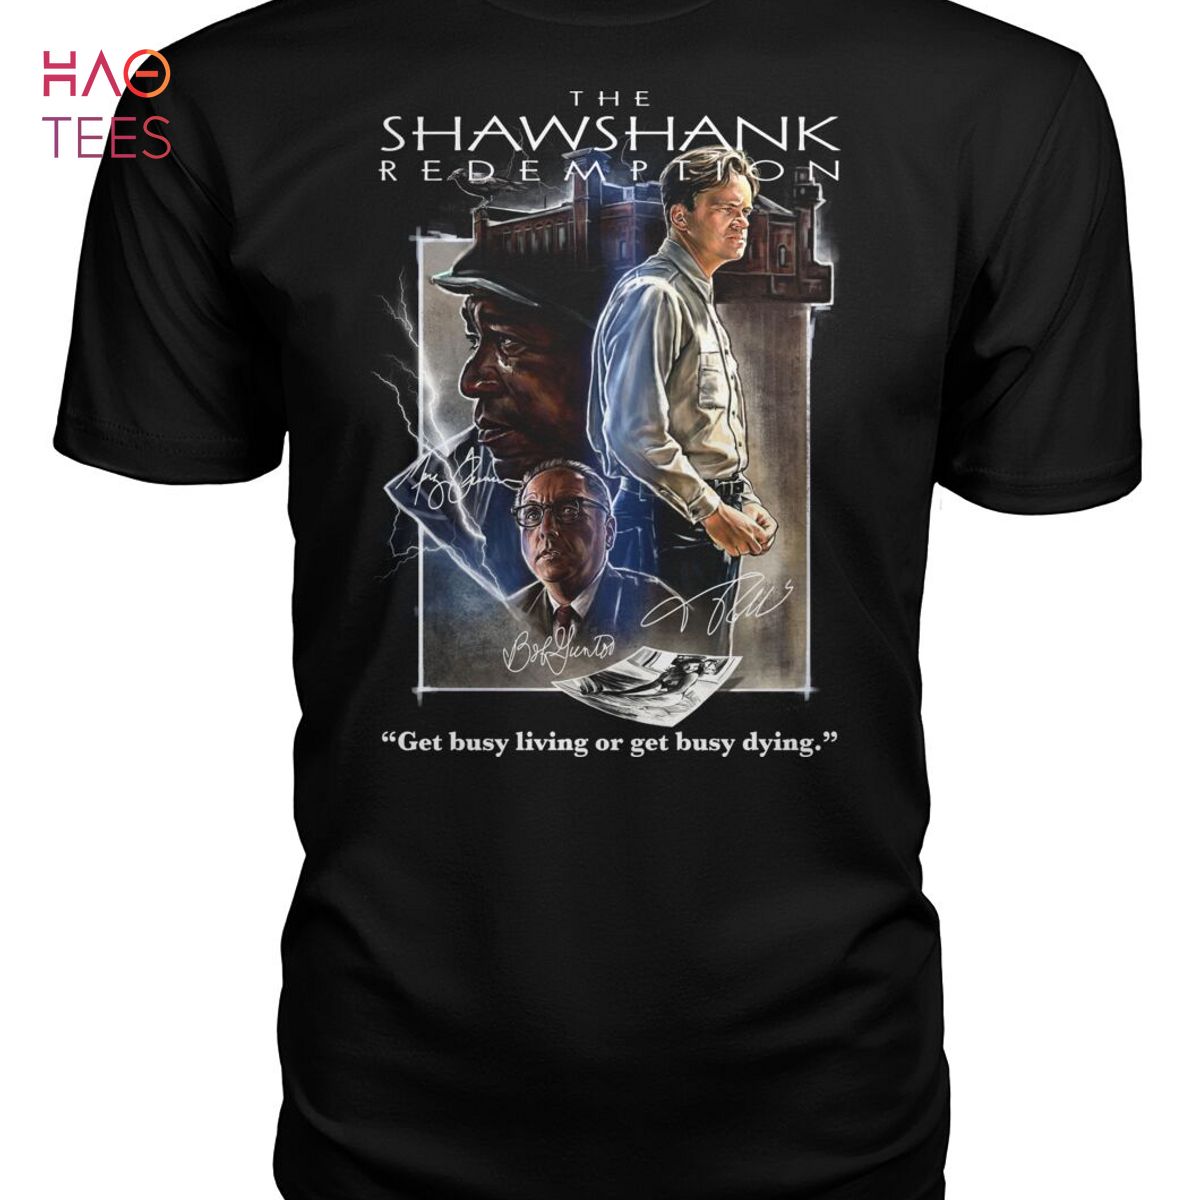 The Shawshank Redemption Ger Busy Living Or Get Busy Dying Shirt